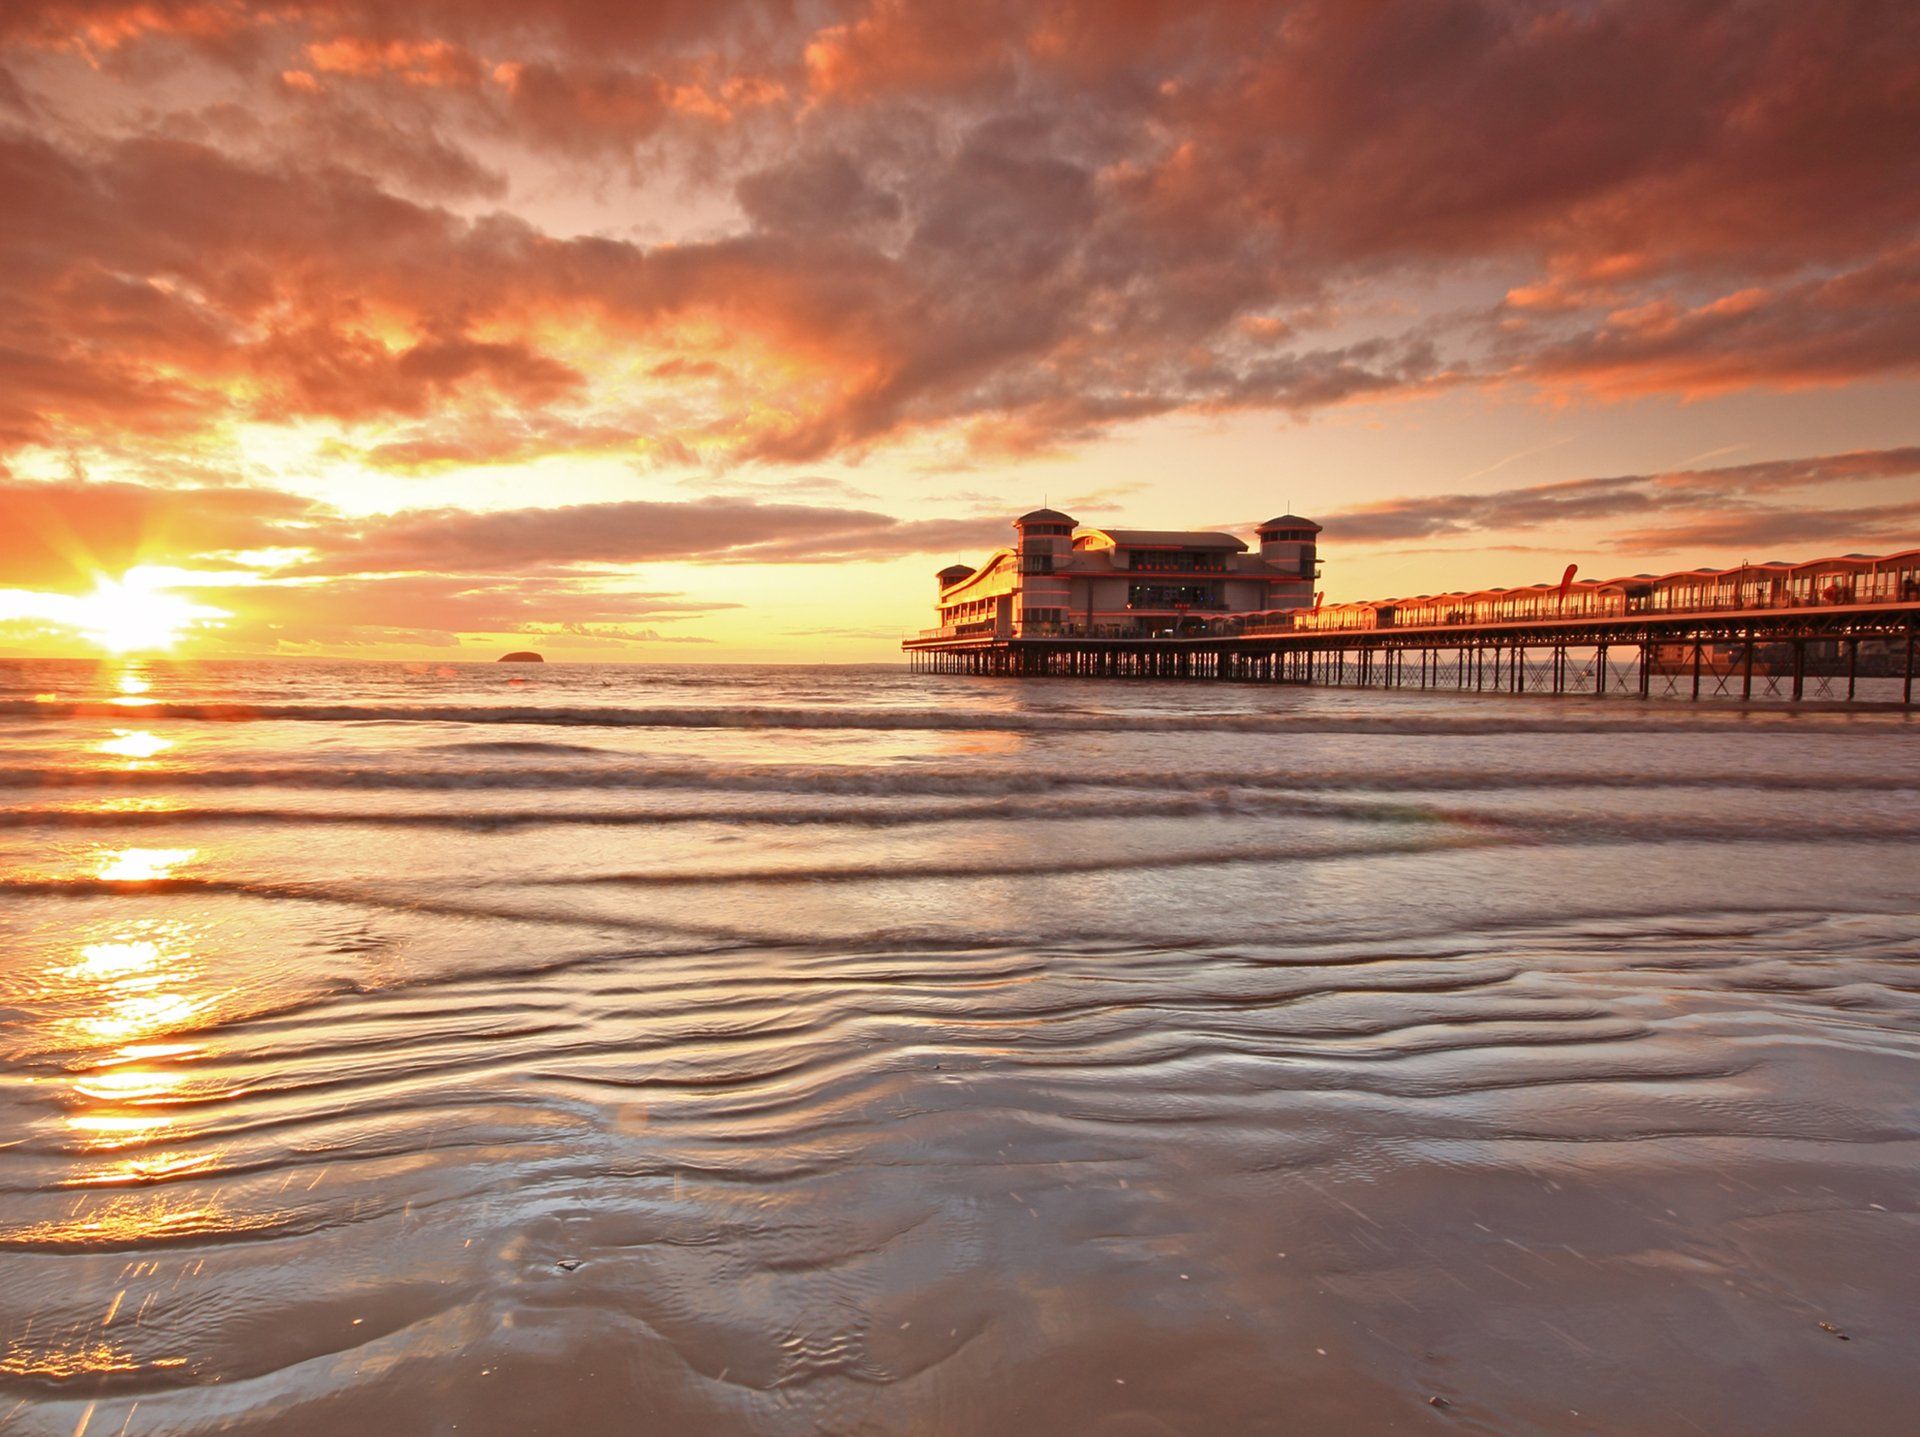 Weston pier at sunset which is close by to our holiday parks.